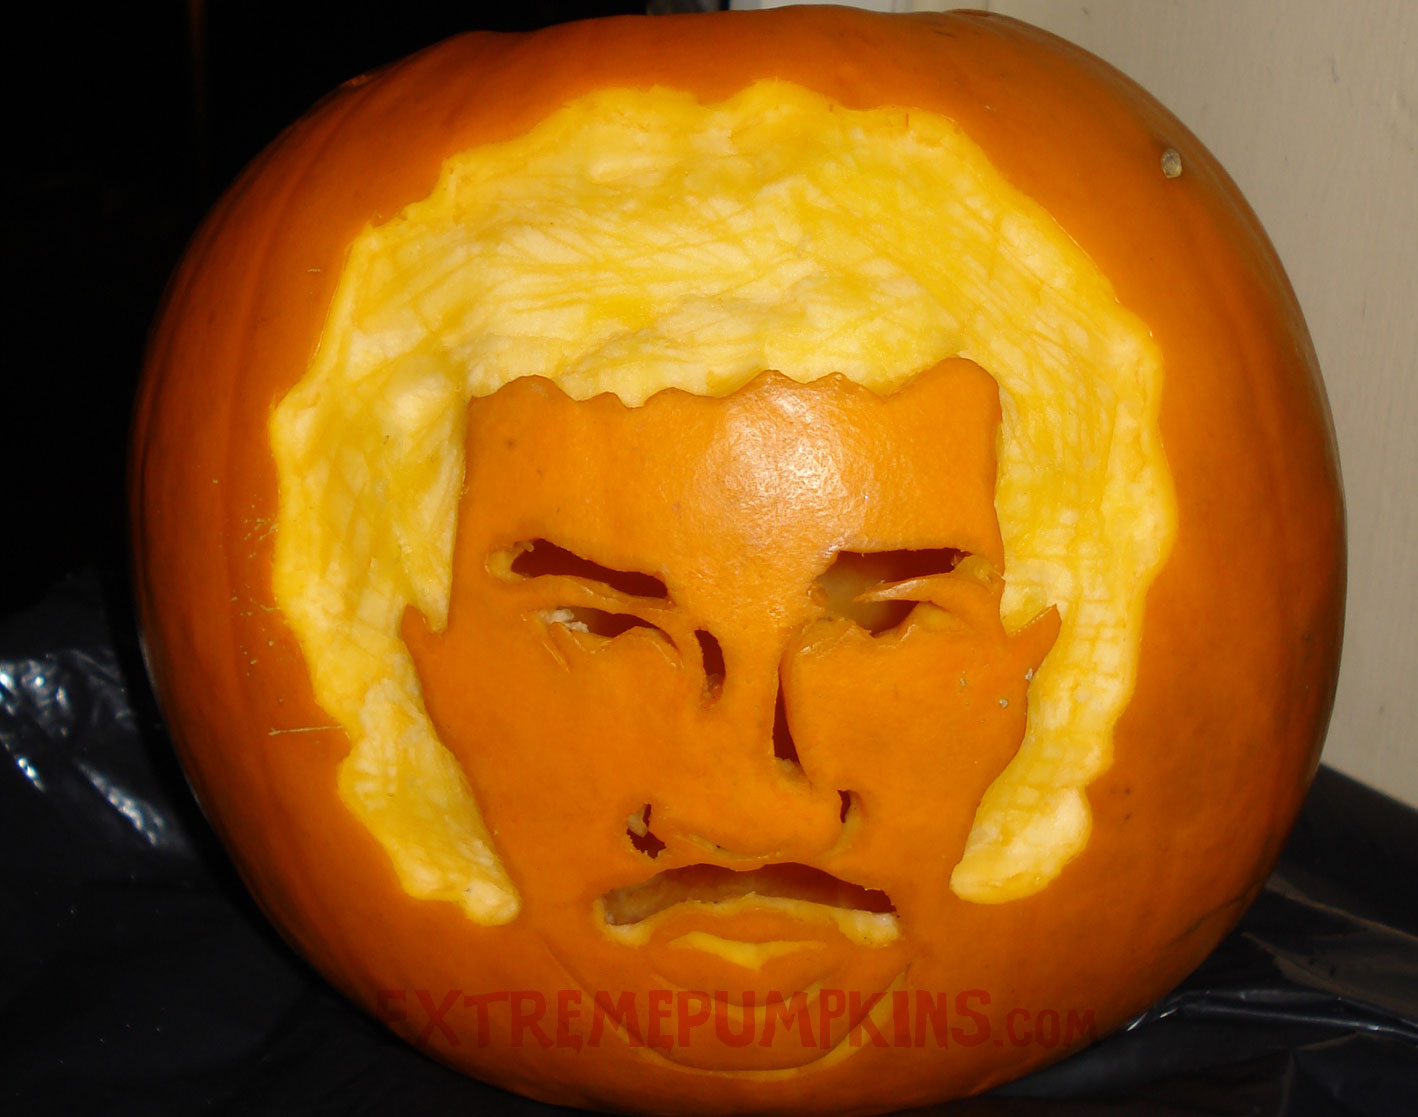 The Lionel Richie Pumpkin - Awesome